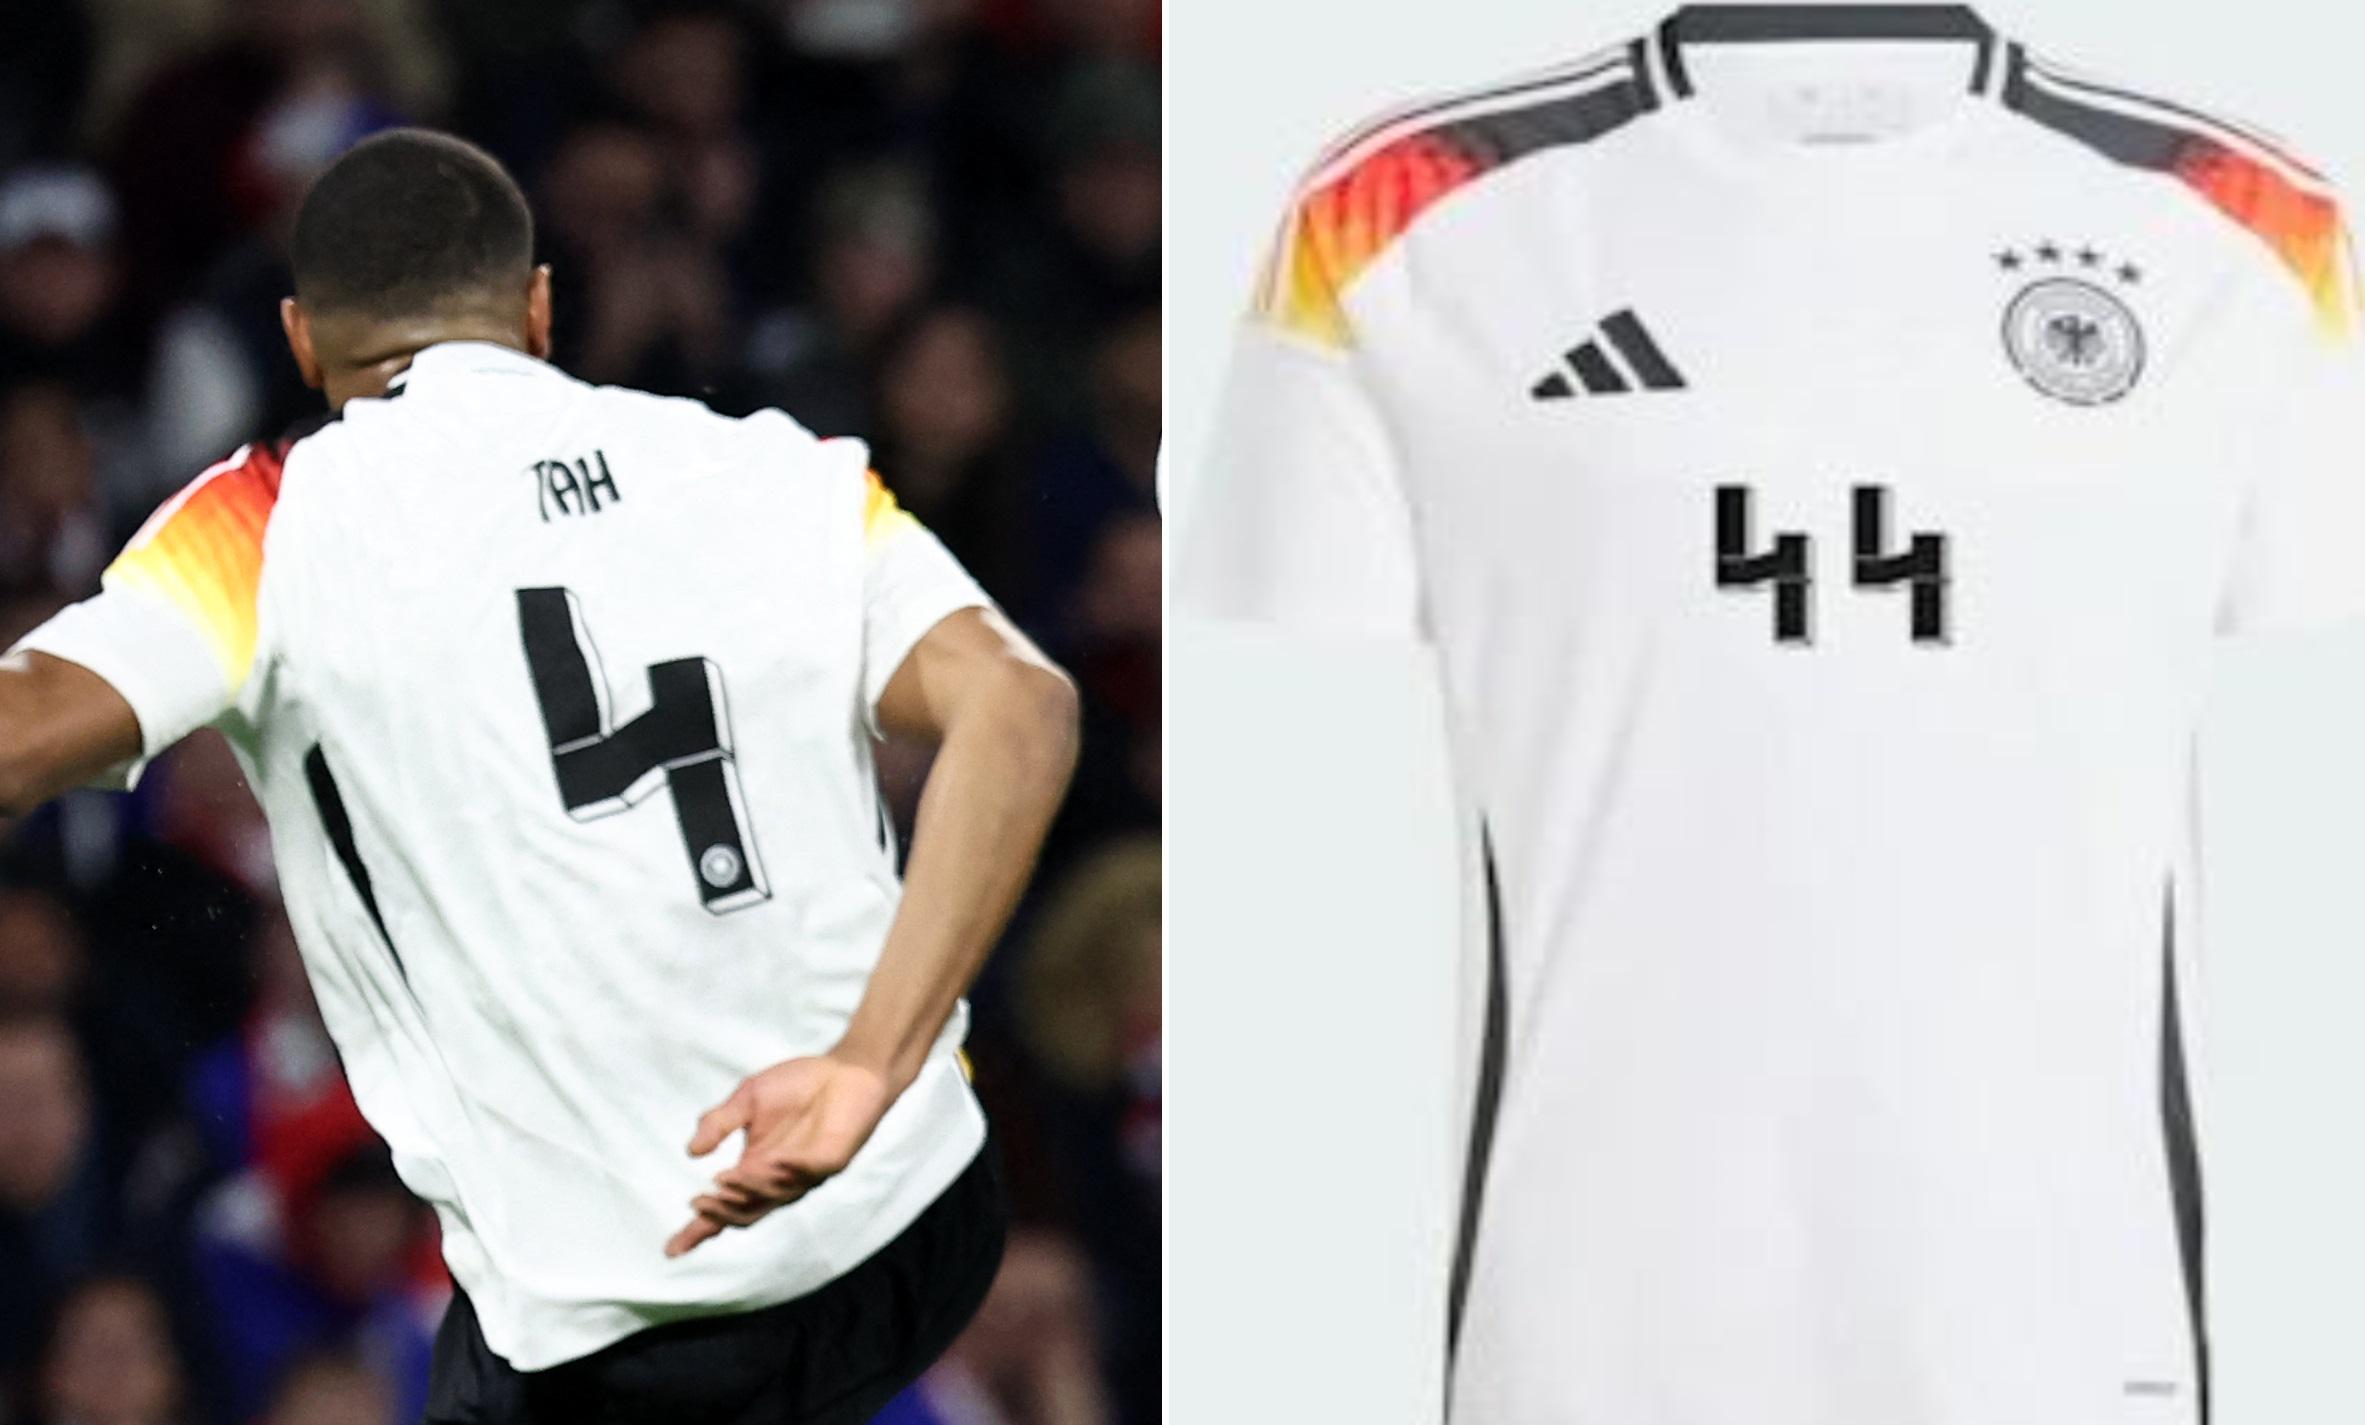 Germany Bans Adidas from Selling Number 44 Shirt Due to Nazi SS Connotations